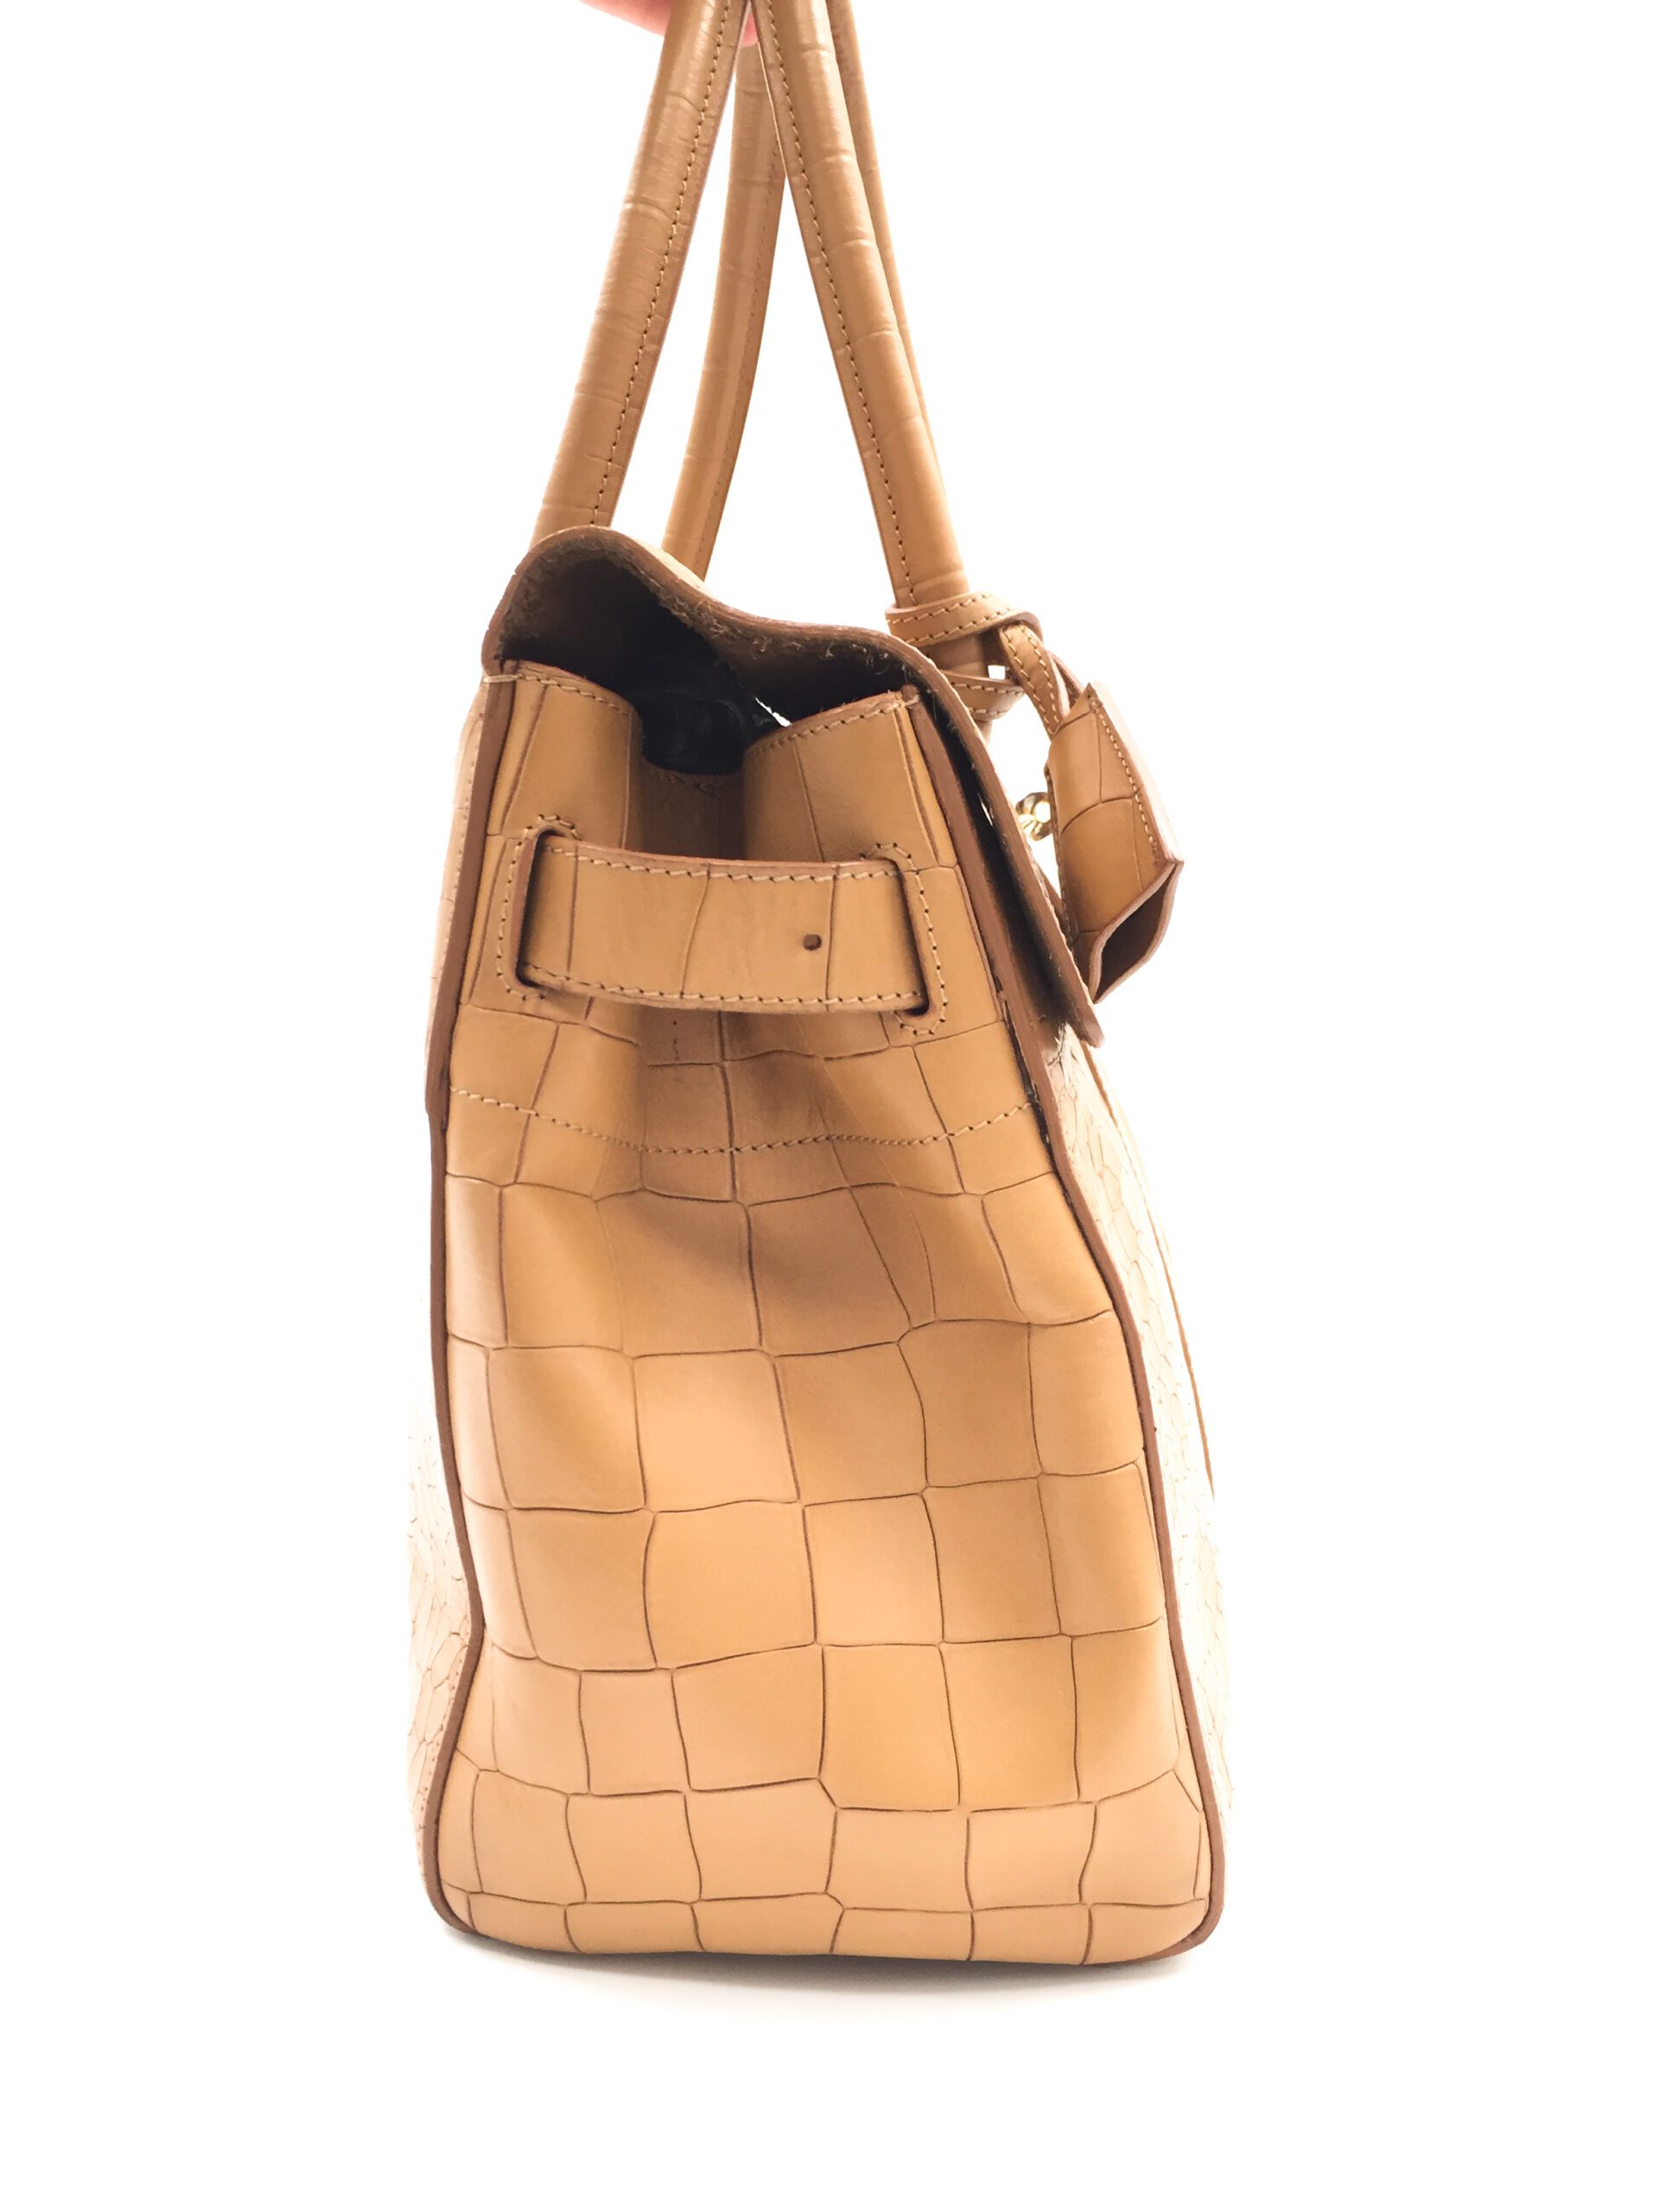 Mulberry Brown Bayswater - Luxury by Ho